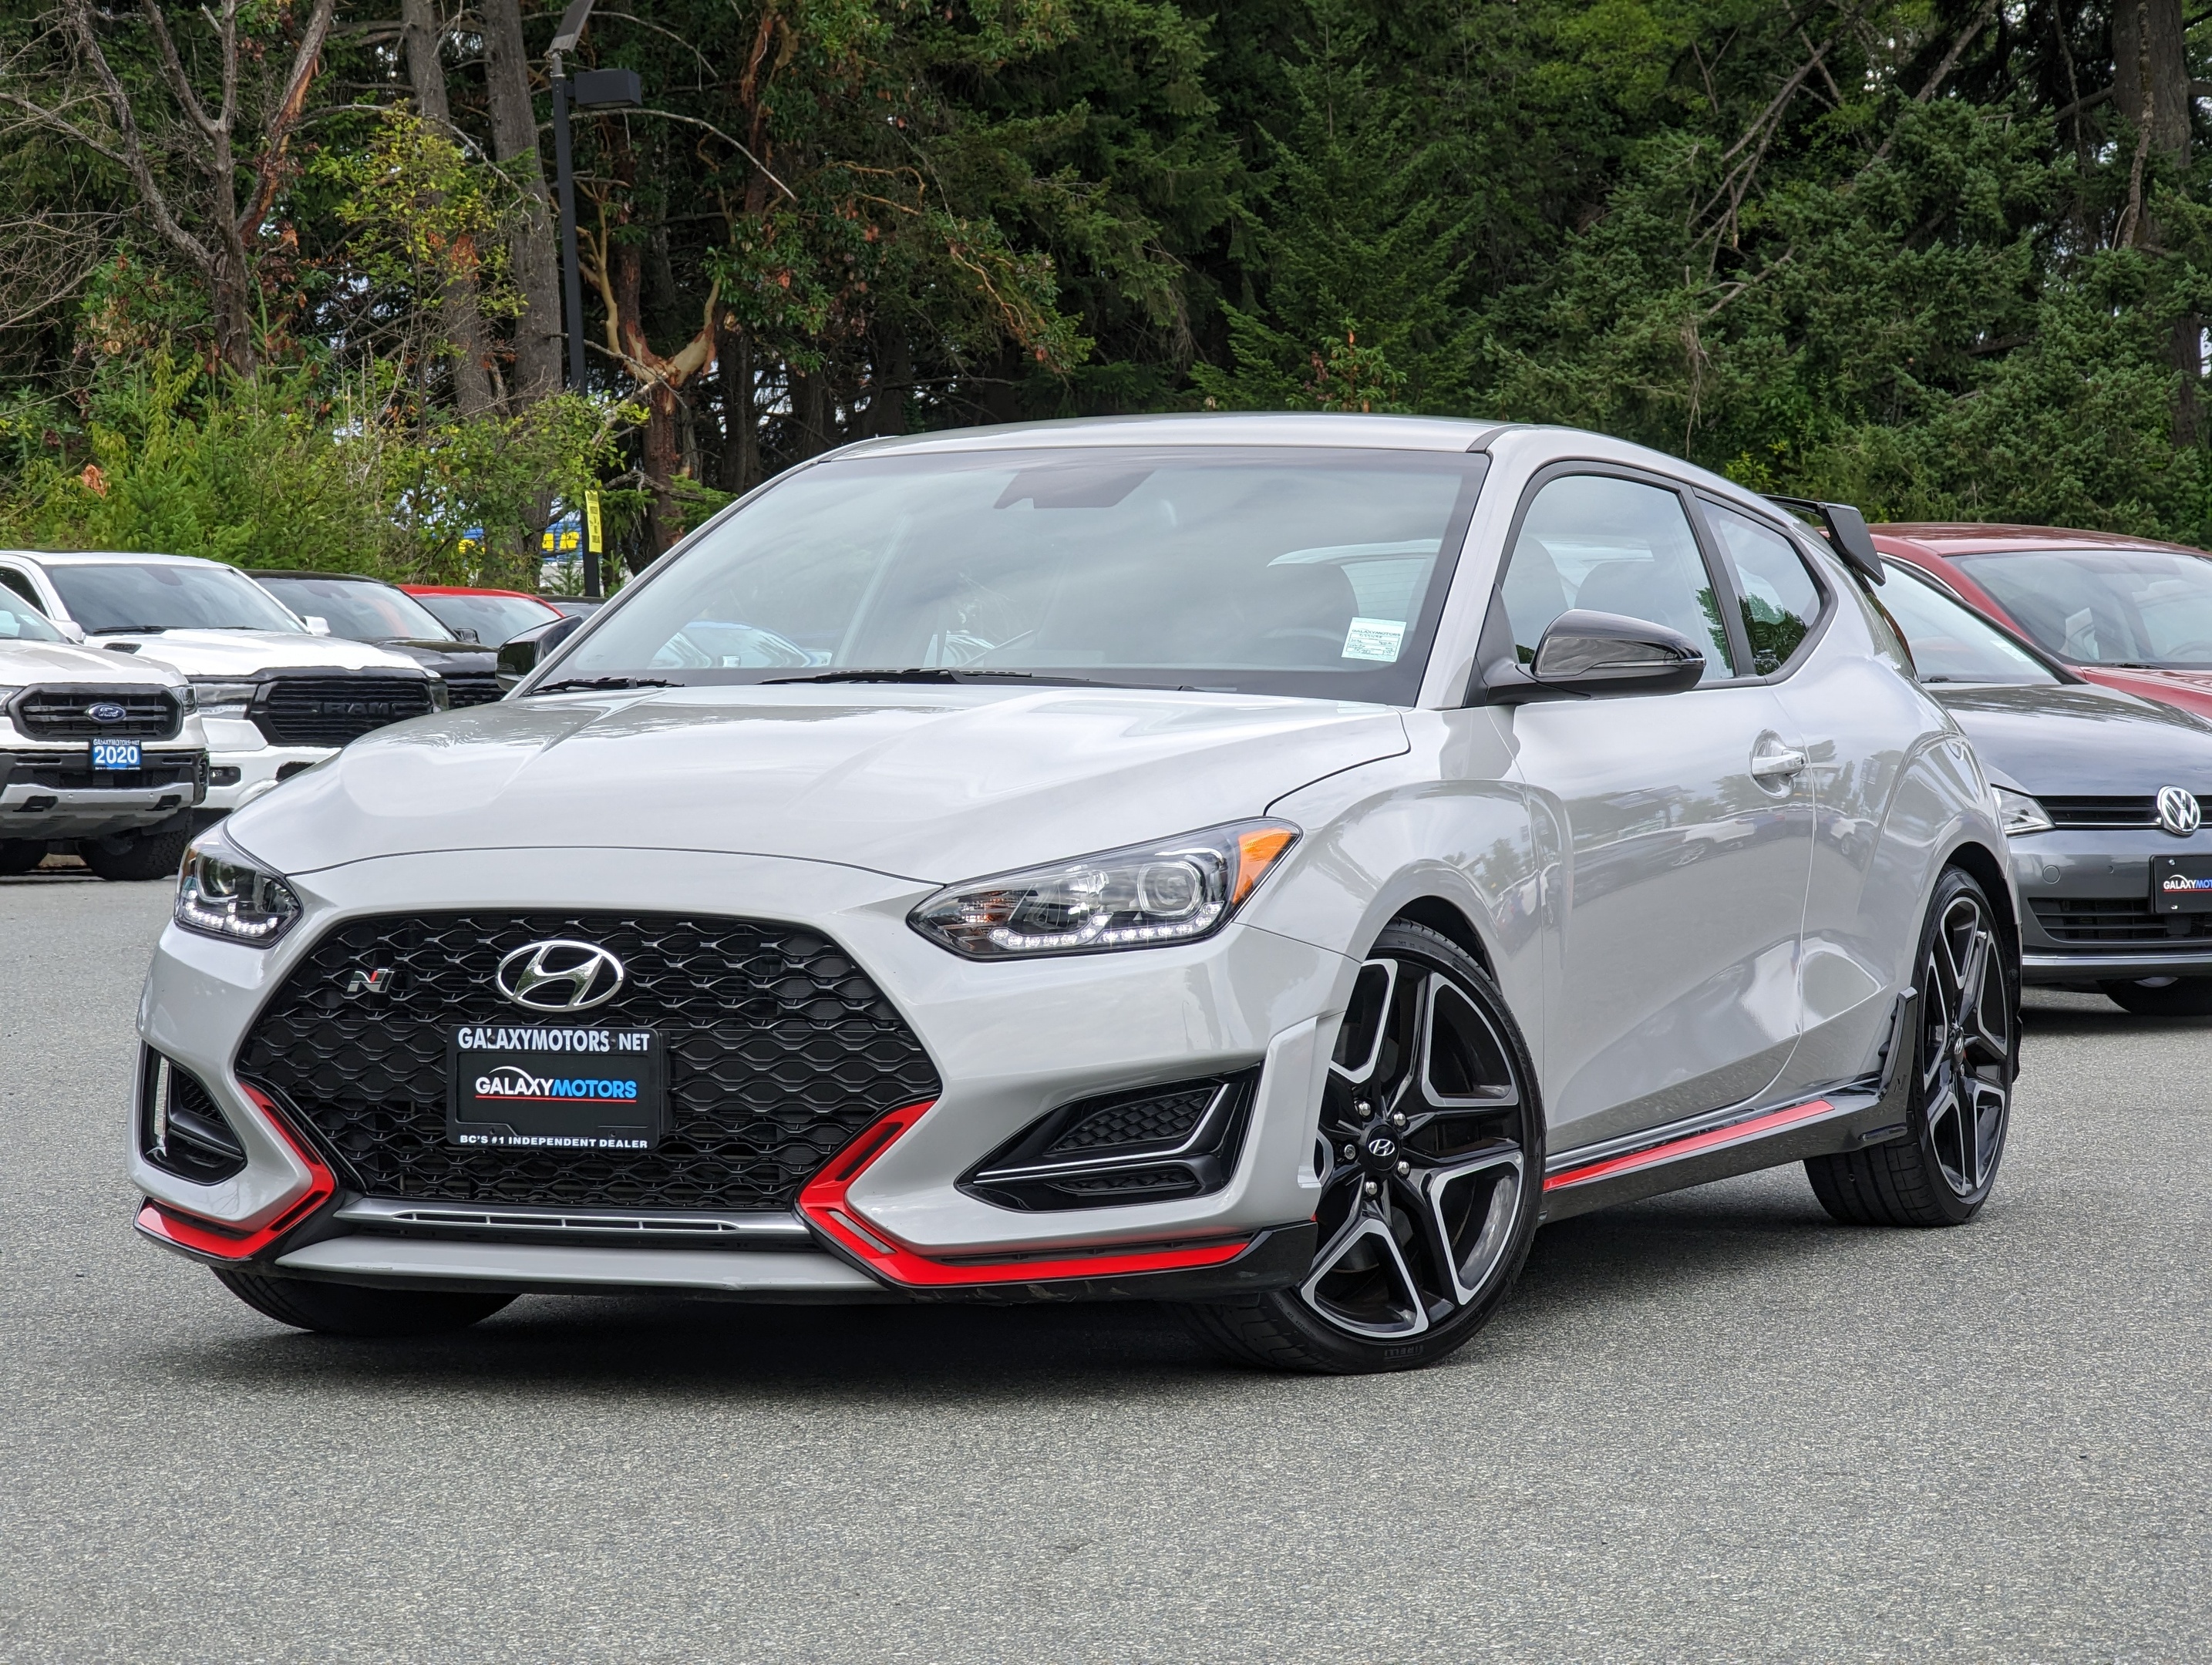 2021 Hyundai Veloster N - Low Mileage, Navigation, Heated Seats